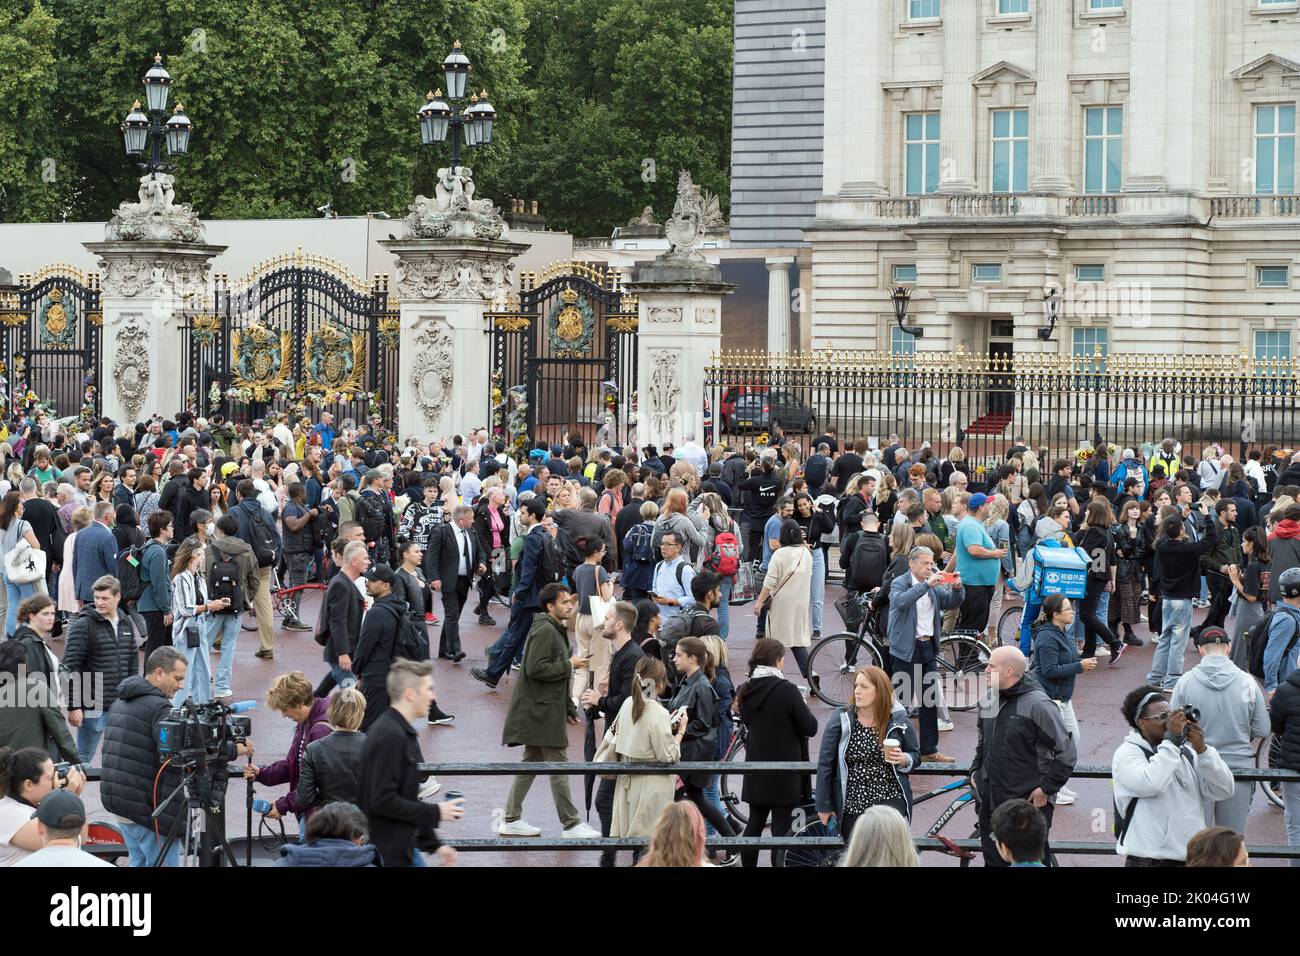 Large crowd outside Buckingham Palace to lay flowers and remember Queen Elizabeth II after her death. London - 9th September 2022 Stock Photo